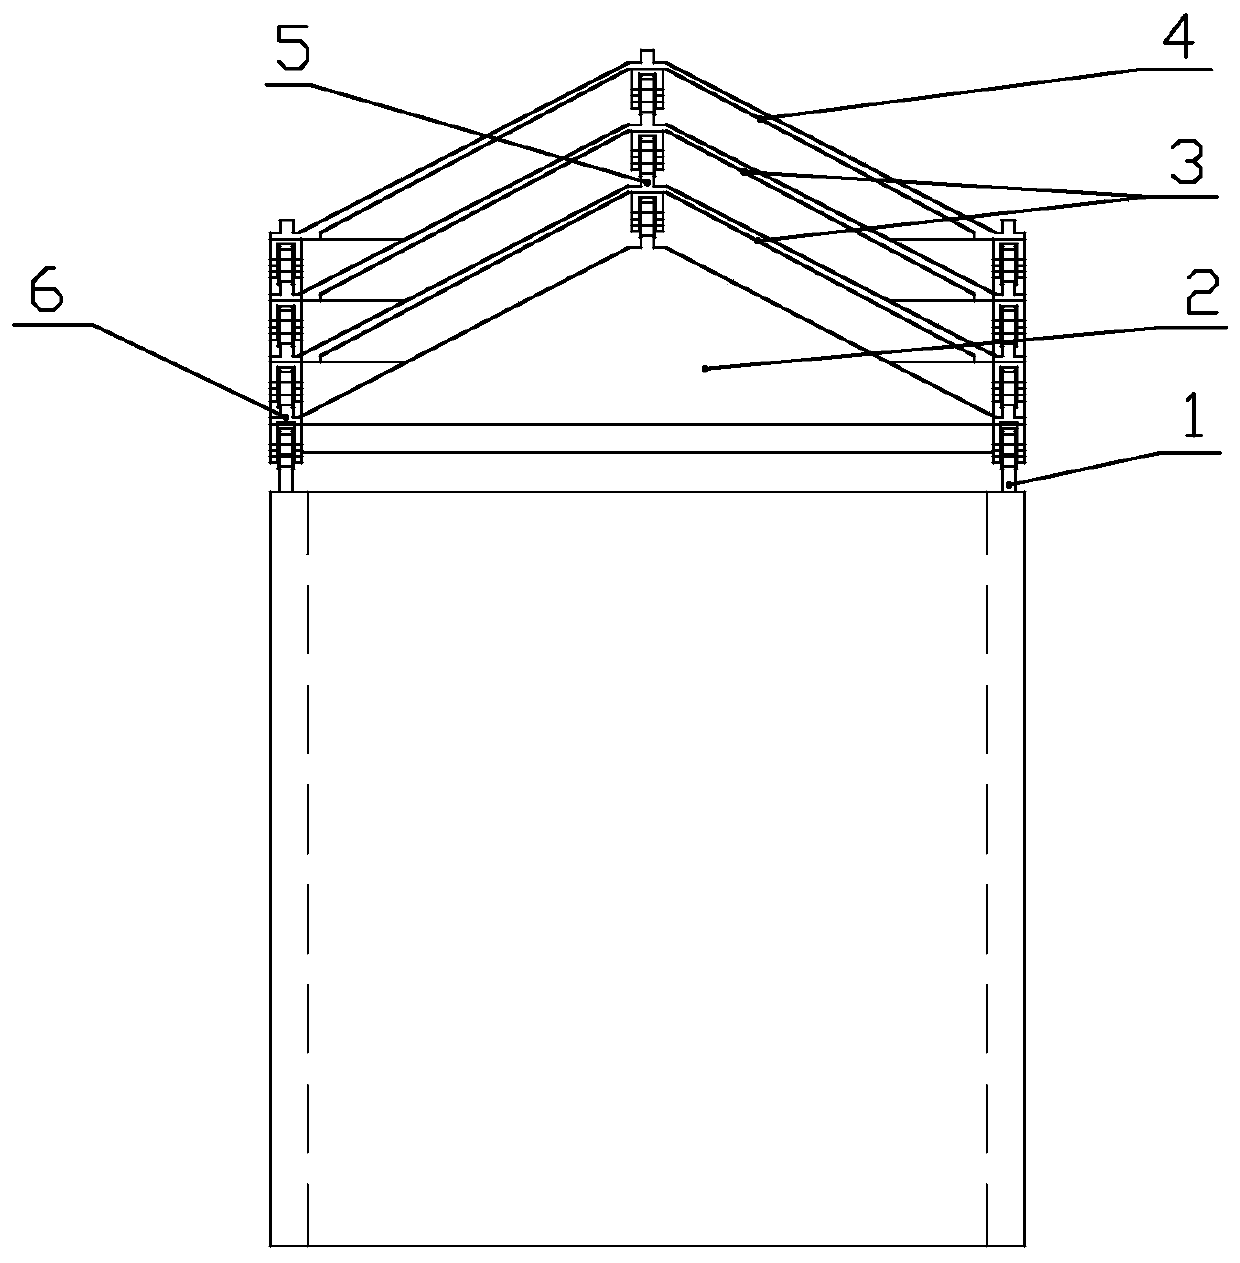 Multi-layer staggered-movement nested openable roof